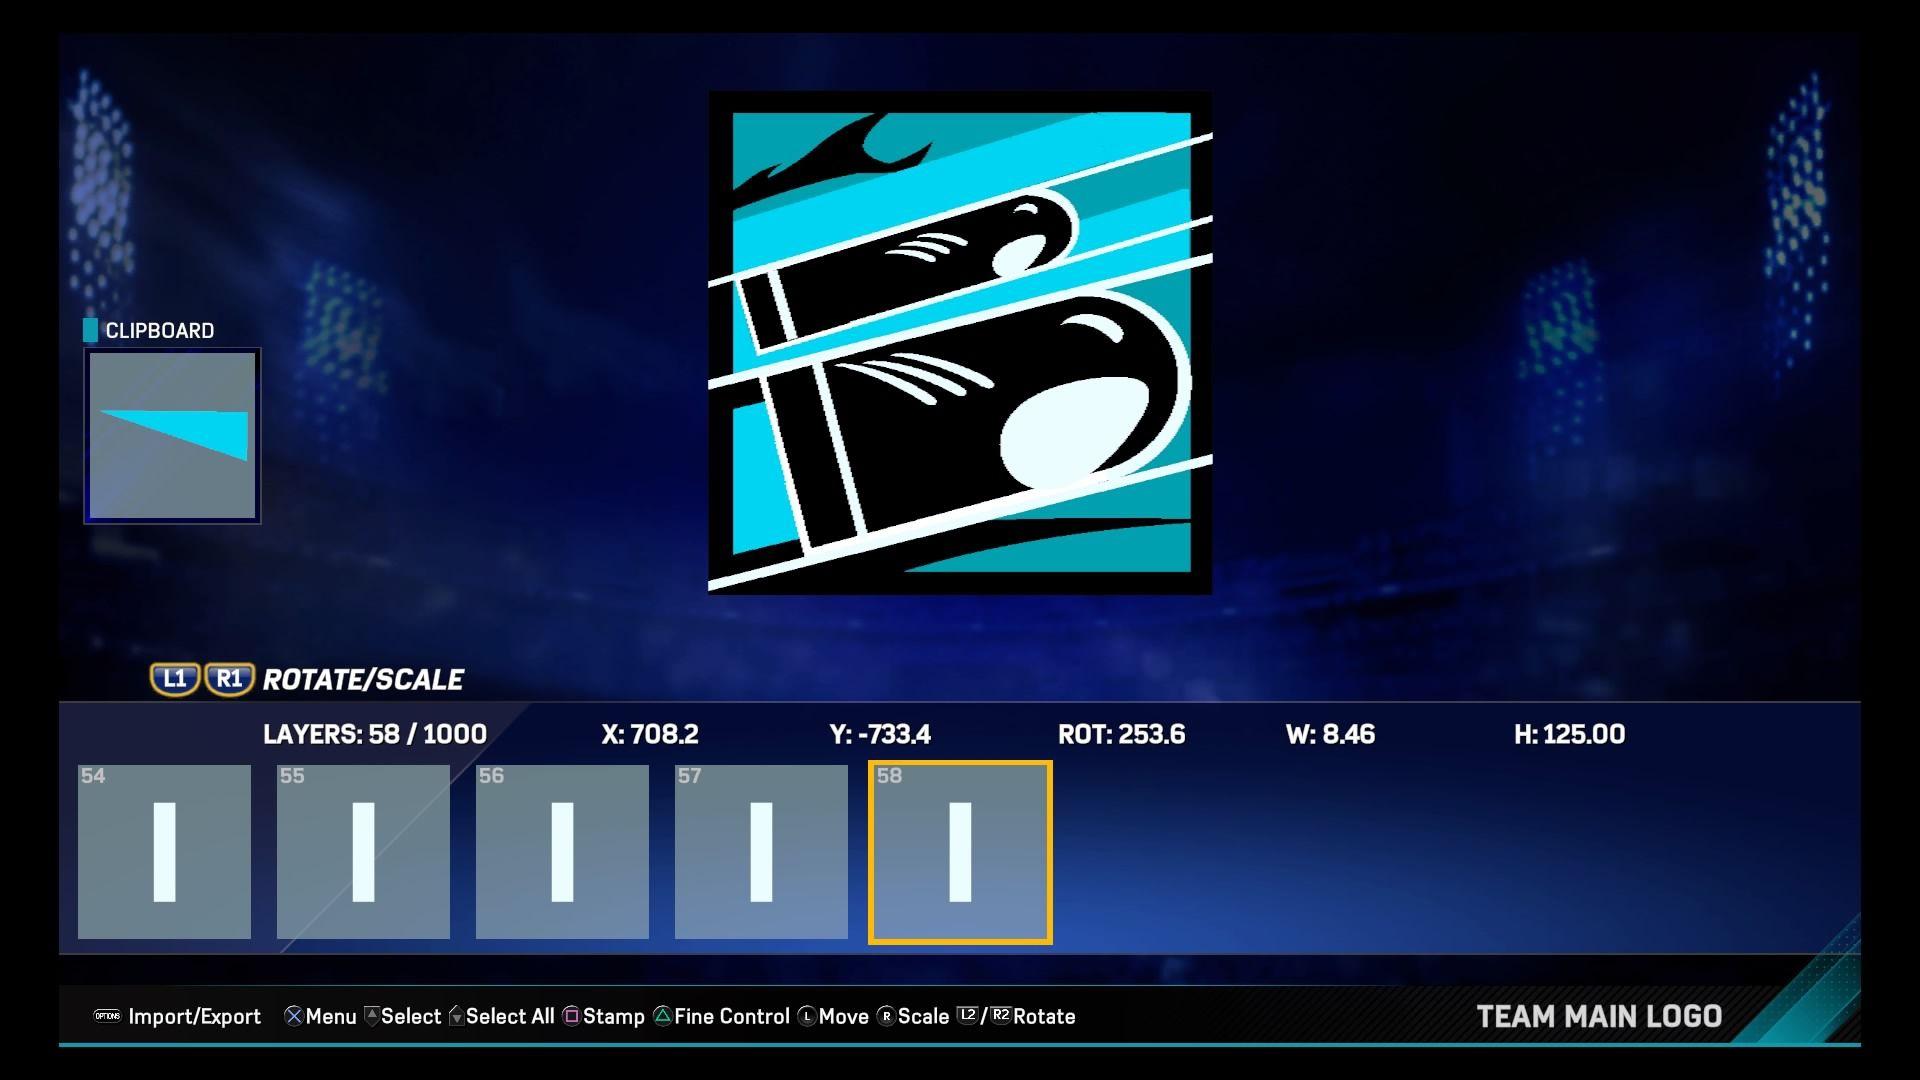 Welcome to the Show Logo - My Buck logo from MLB The Show 17! : Rainbow6